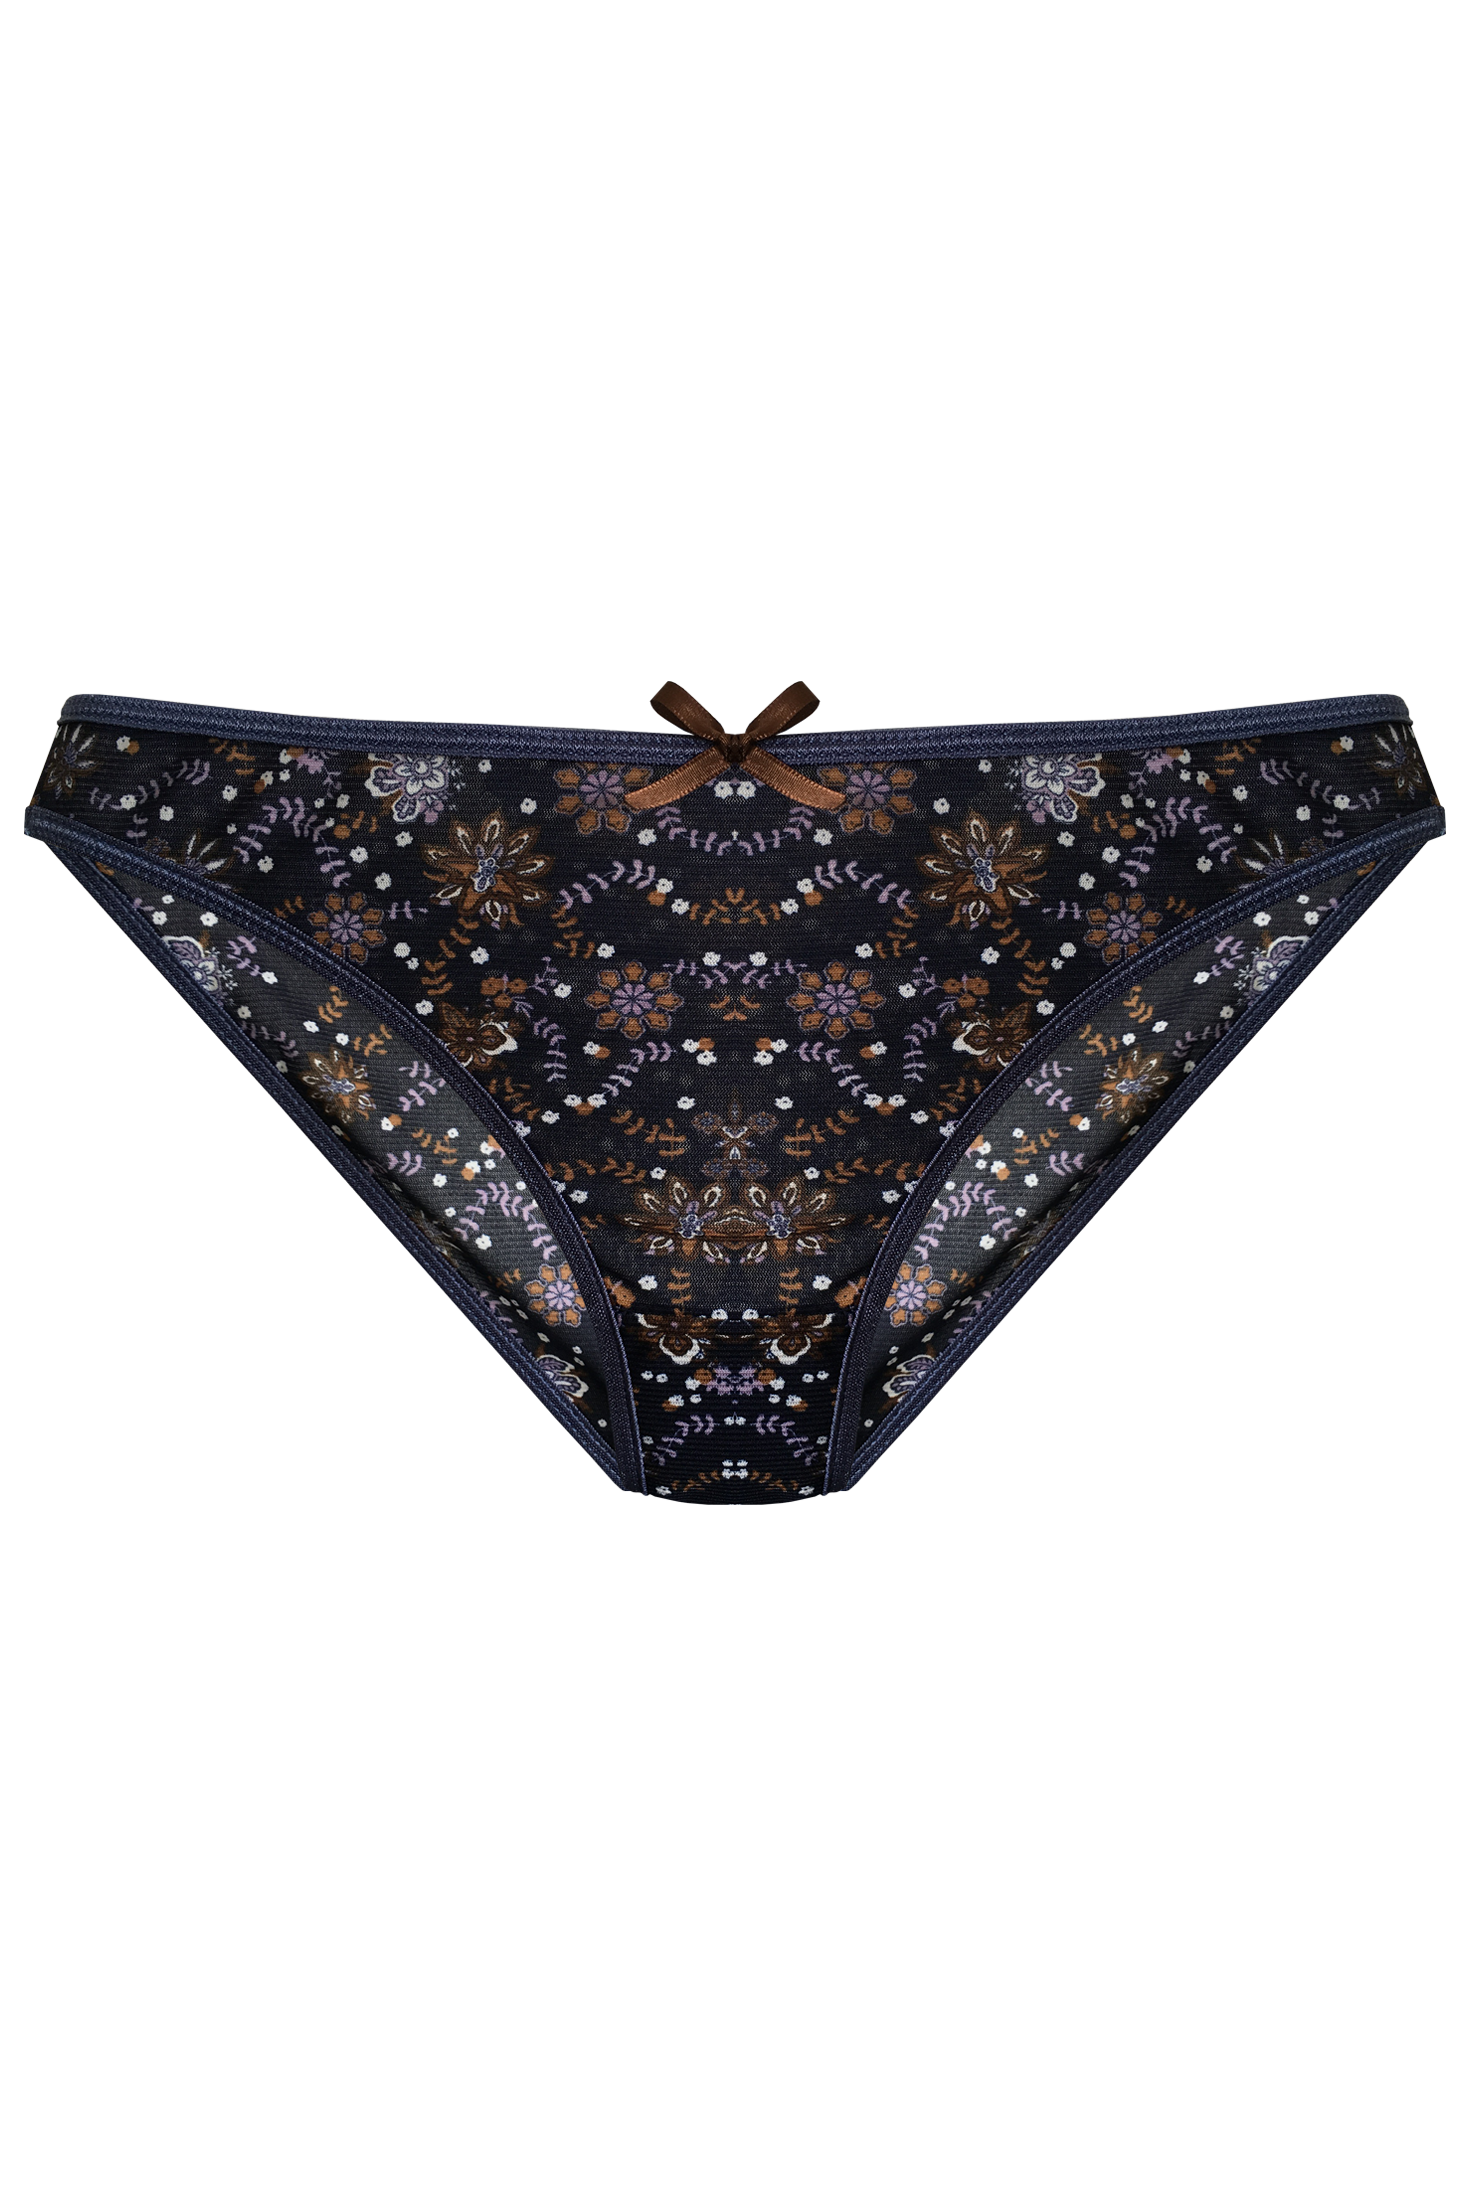 LL NAVY FLORAL BRIEF - Lingerie Letters